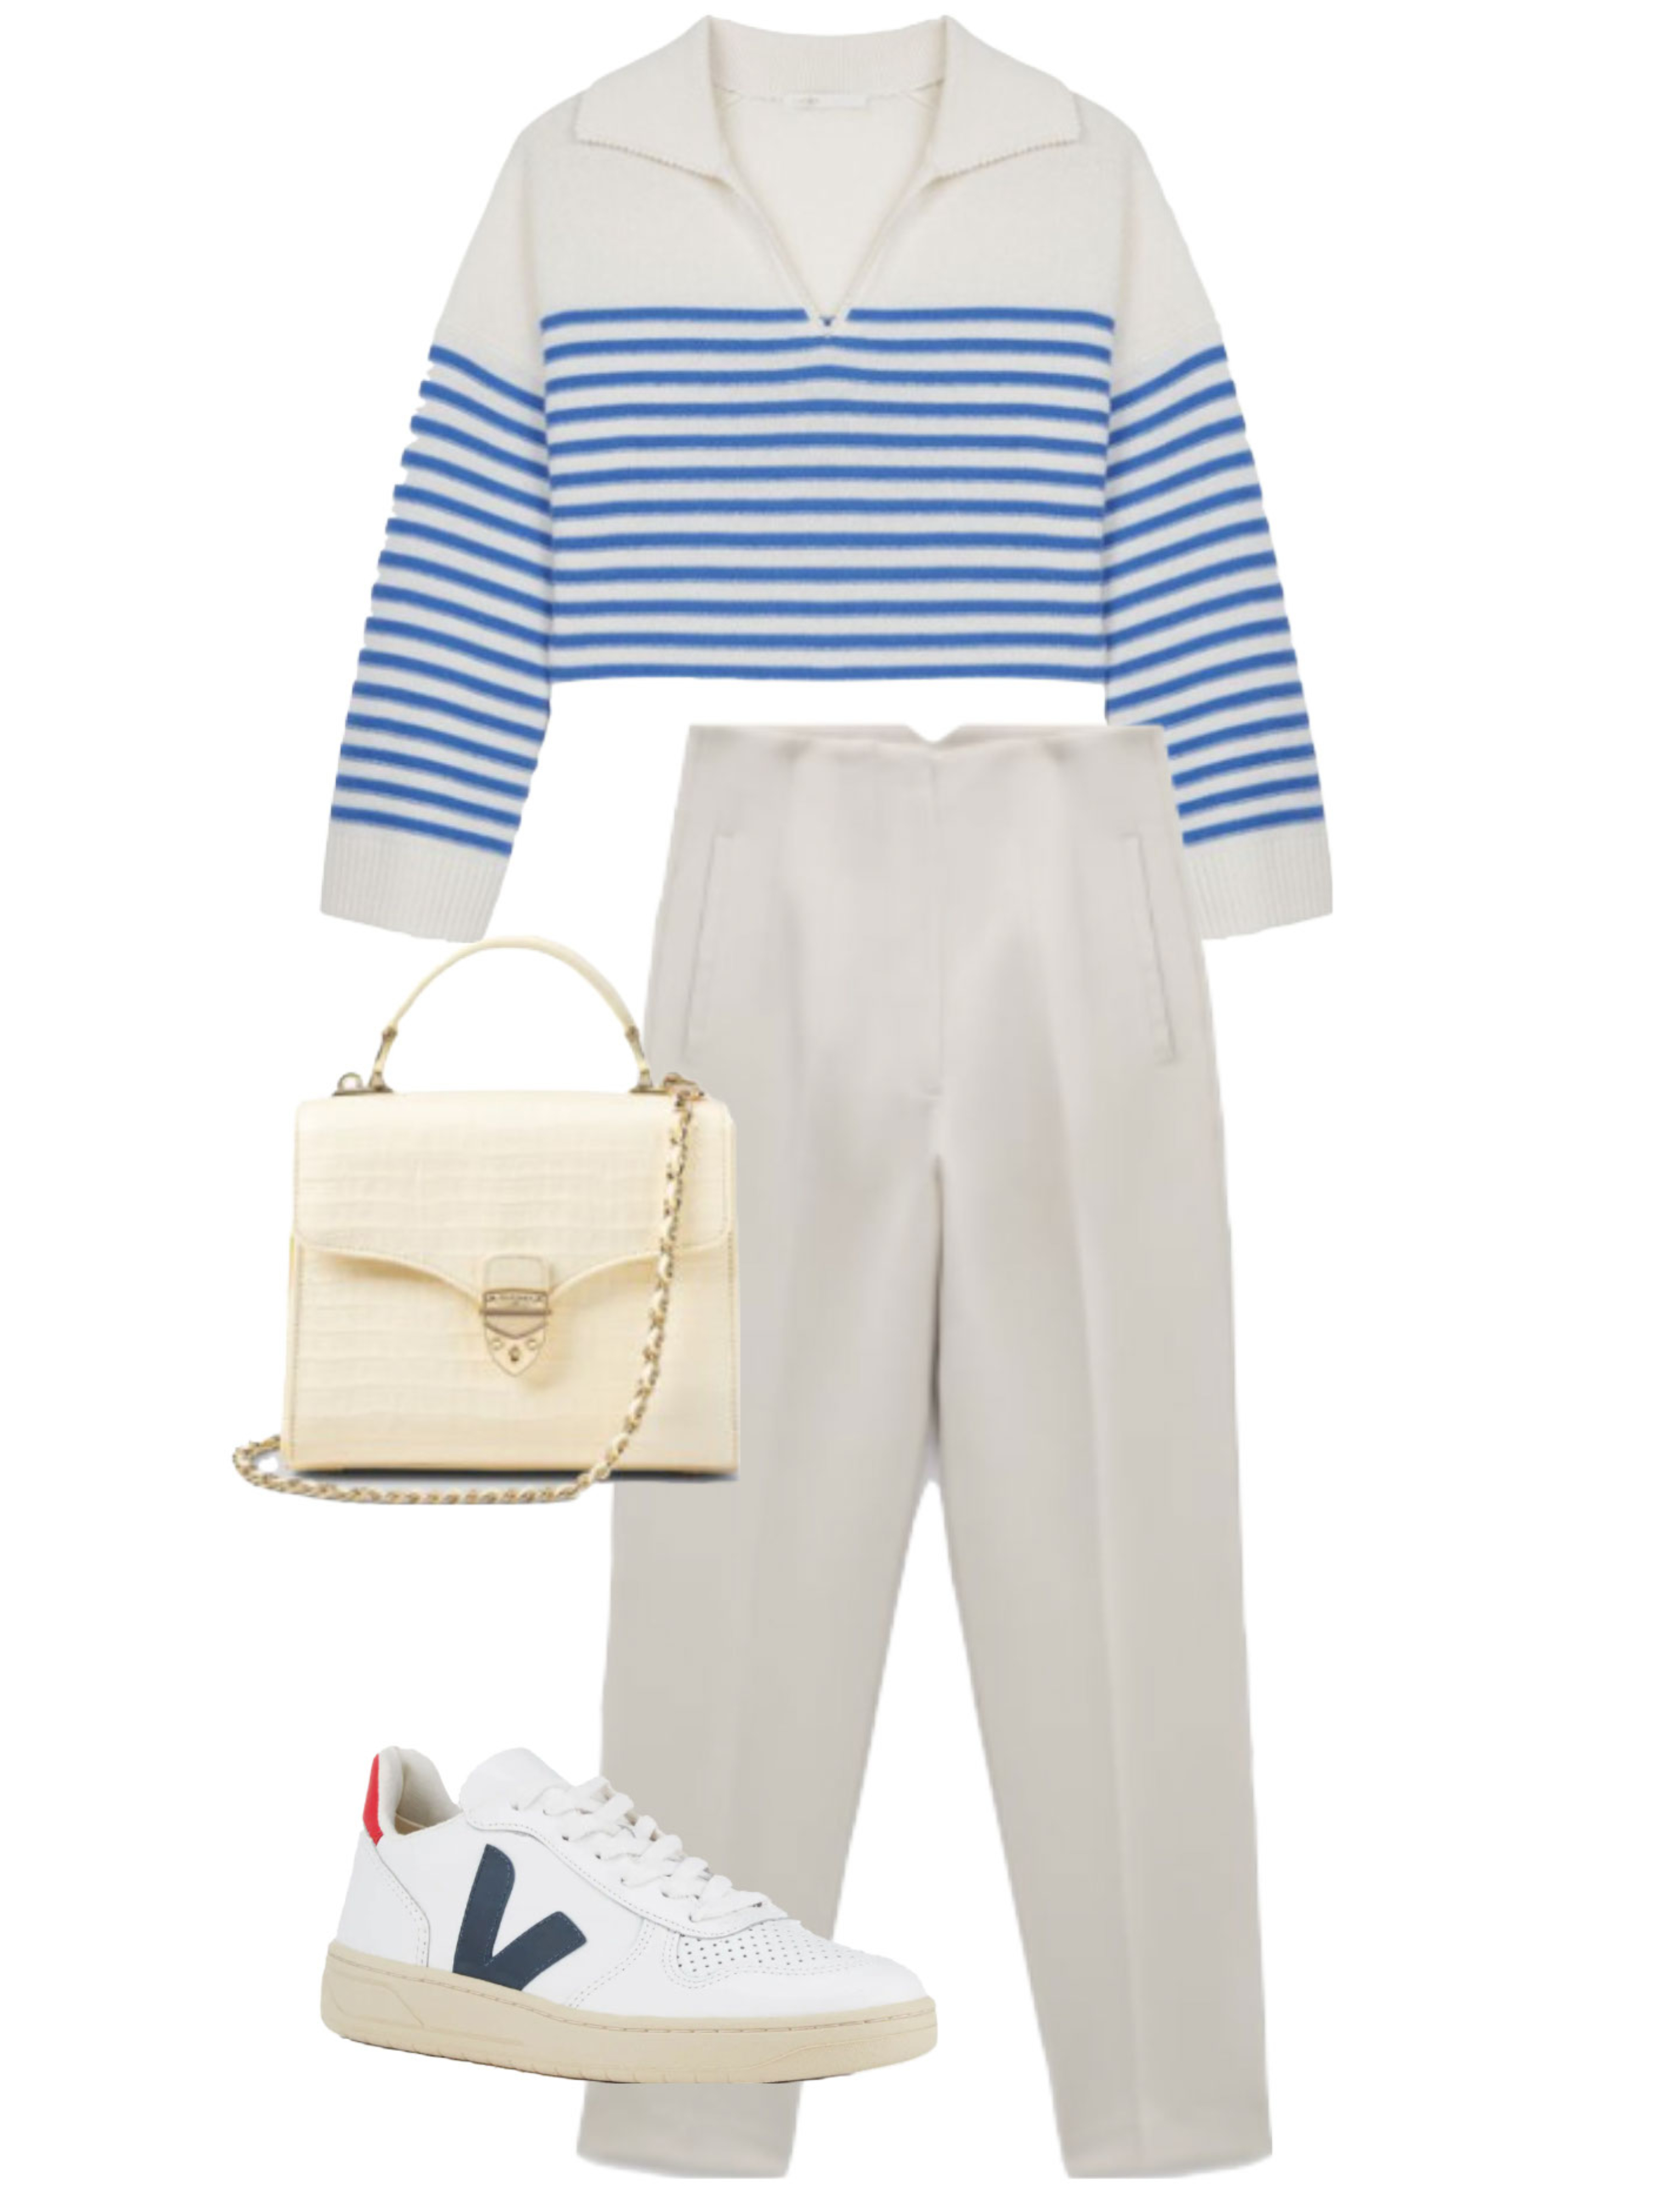 maje-stripe-cashmere-jumper-high-waist-trousers-zara-outfit-collage